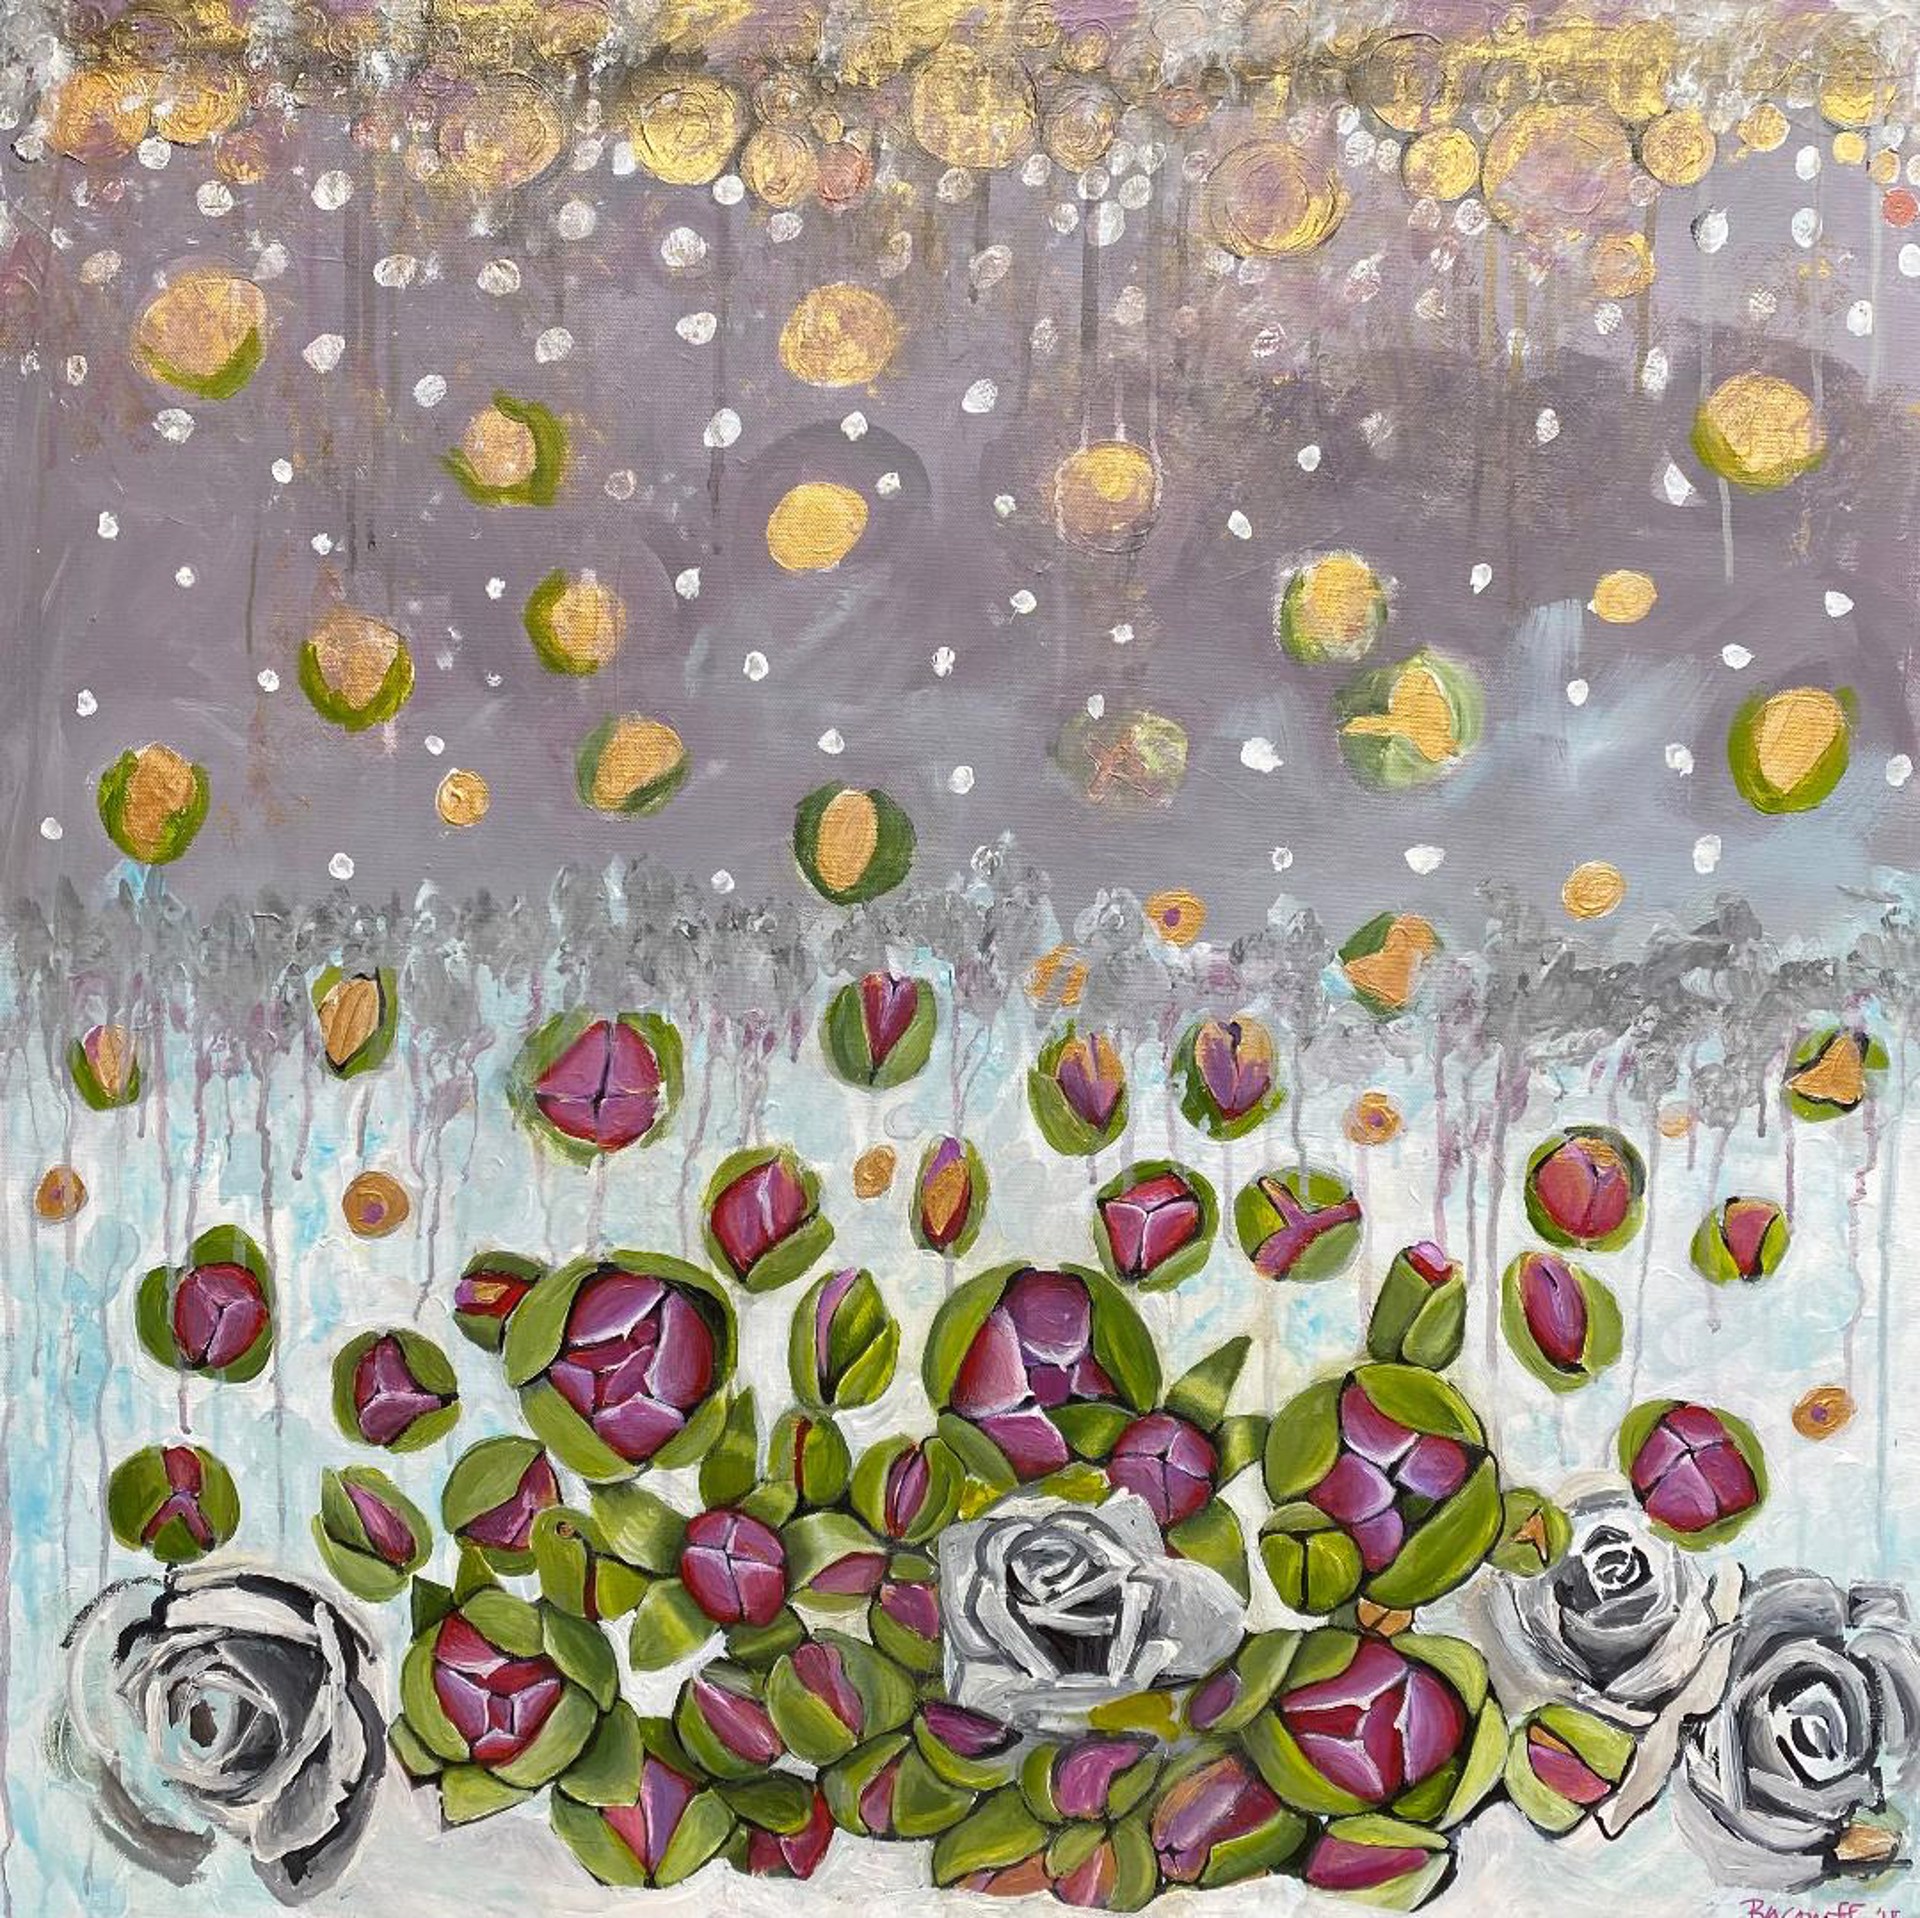 Mulberry Rain by Beth Aronoff